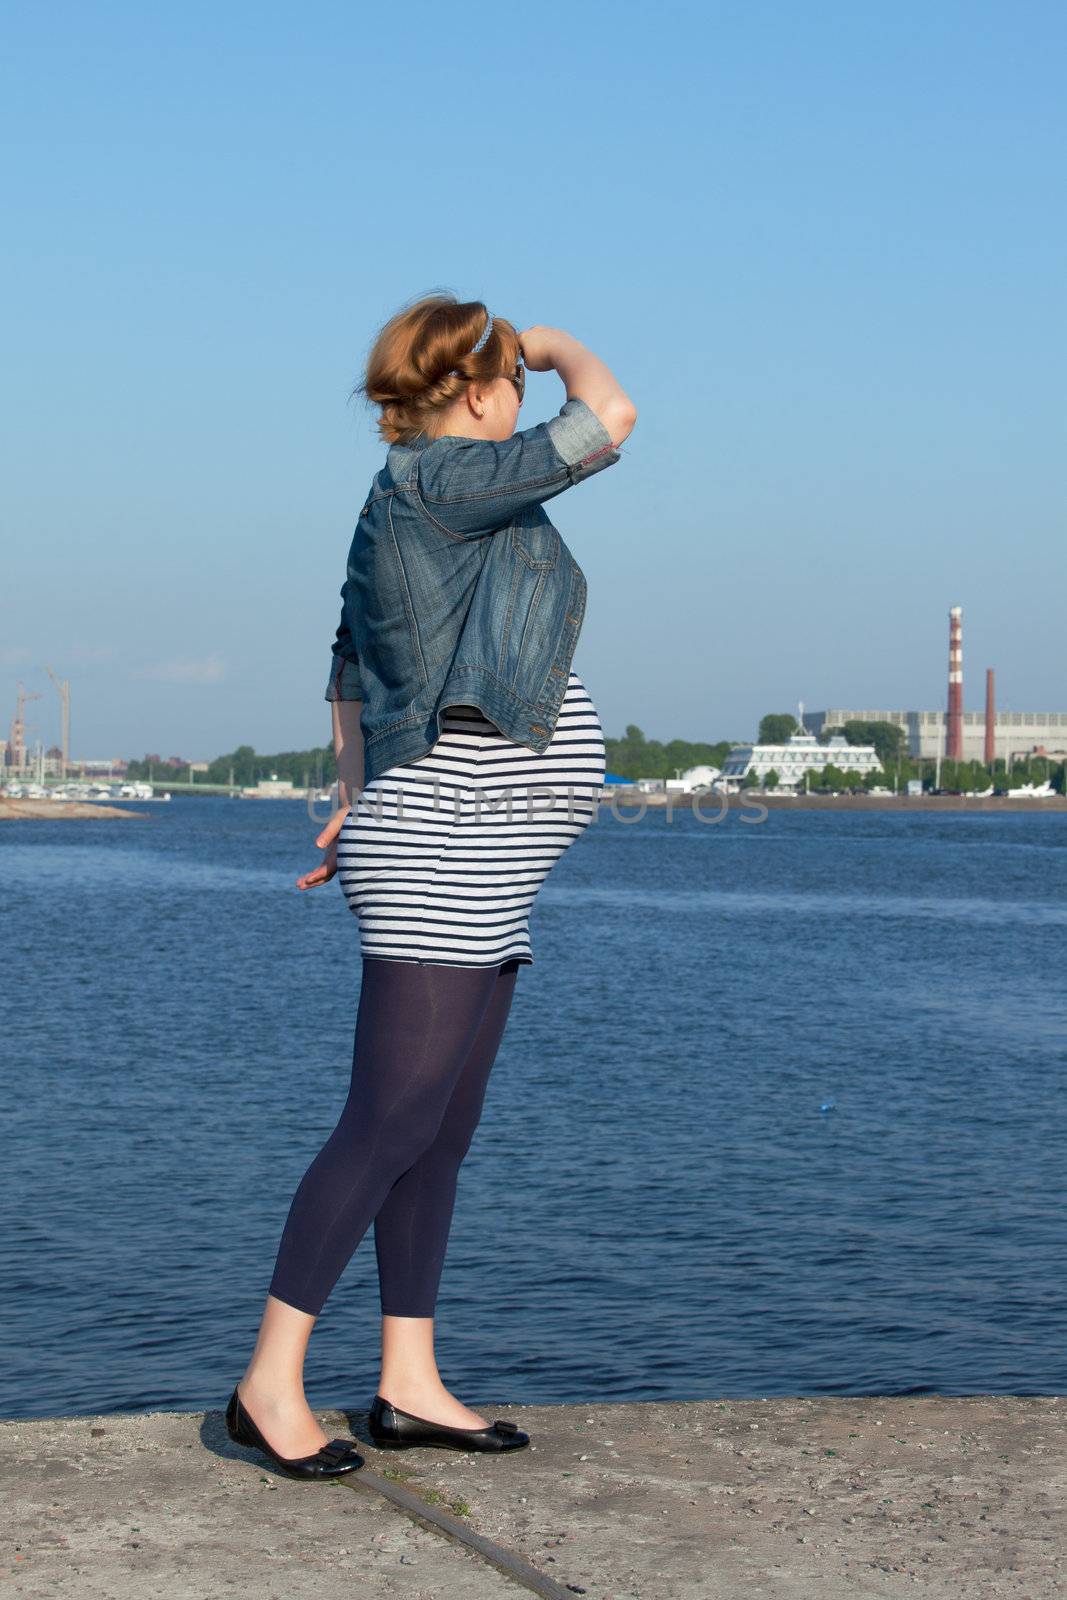 Pregnant woman standing on the pier and looking into the distance